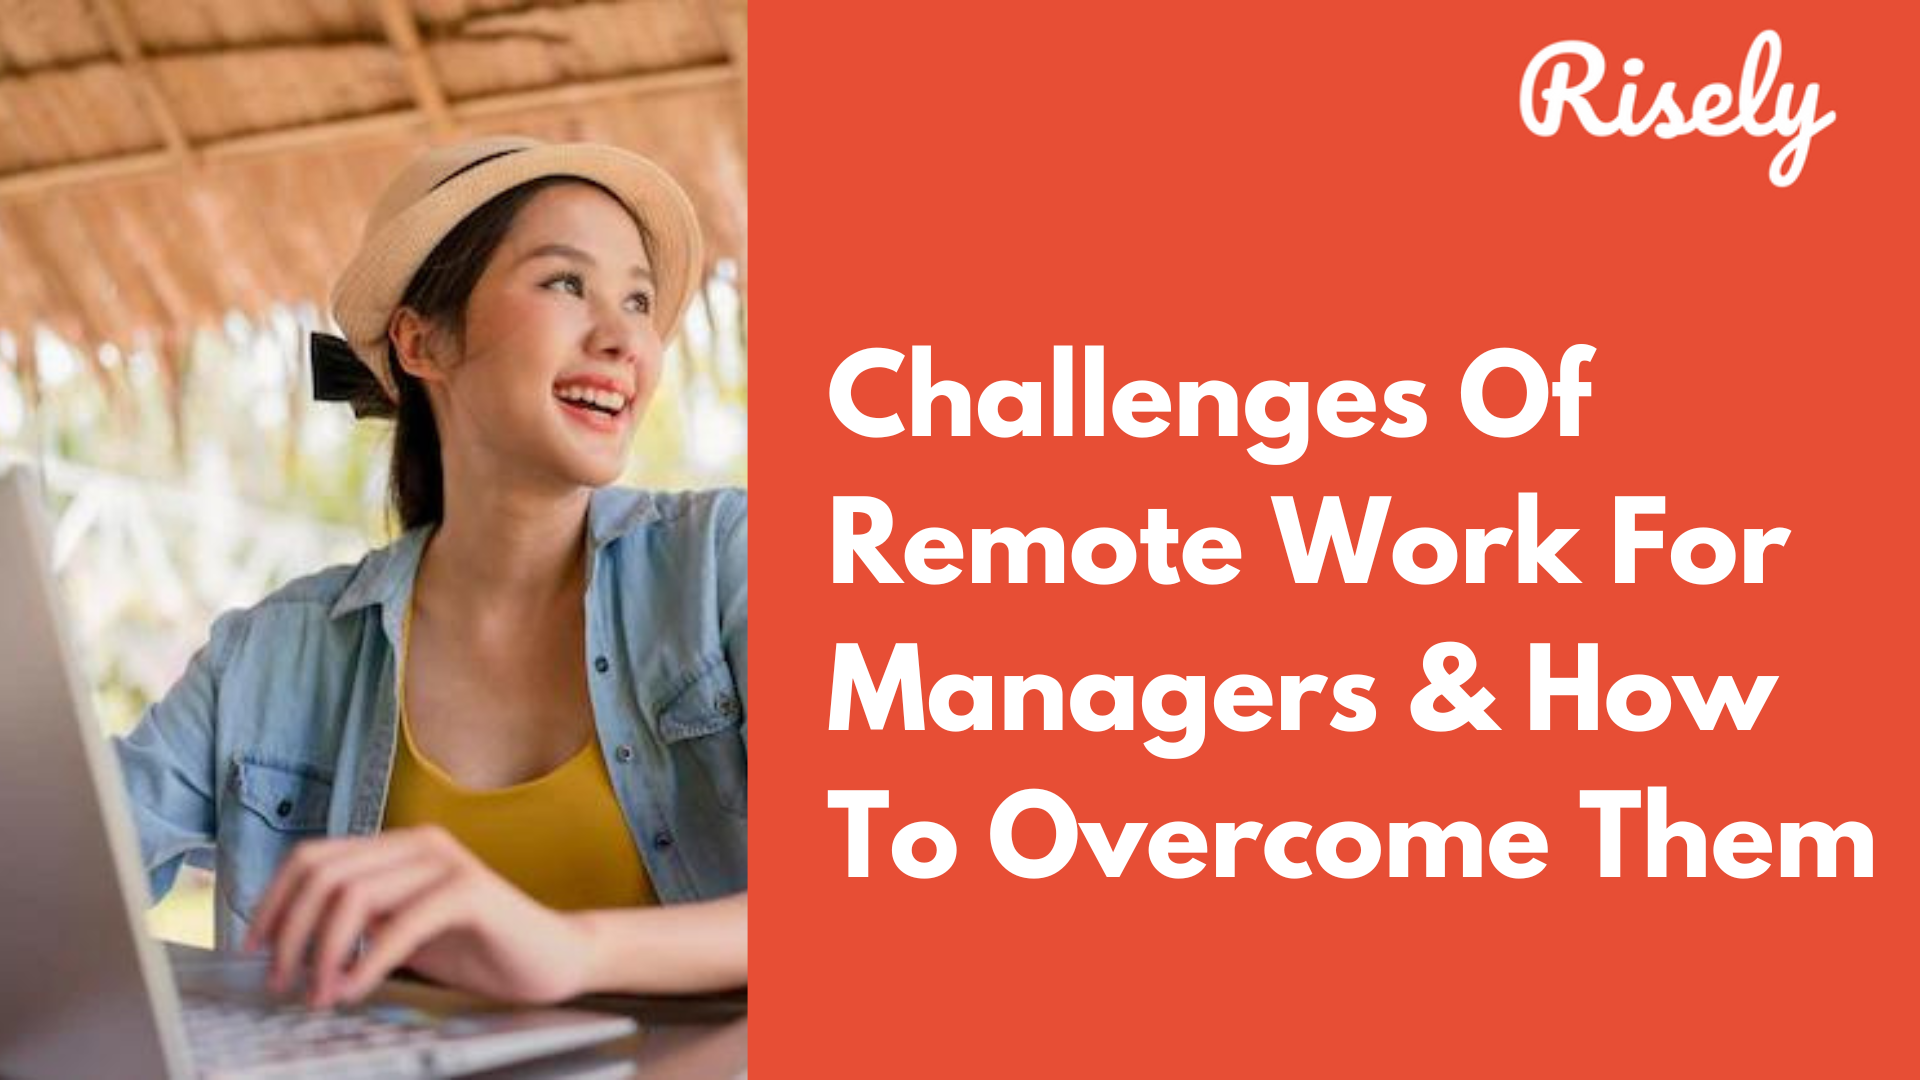 Challenges Of Remote Work For Managers & How To Overcome Them